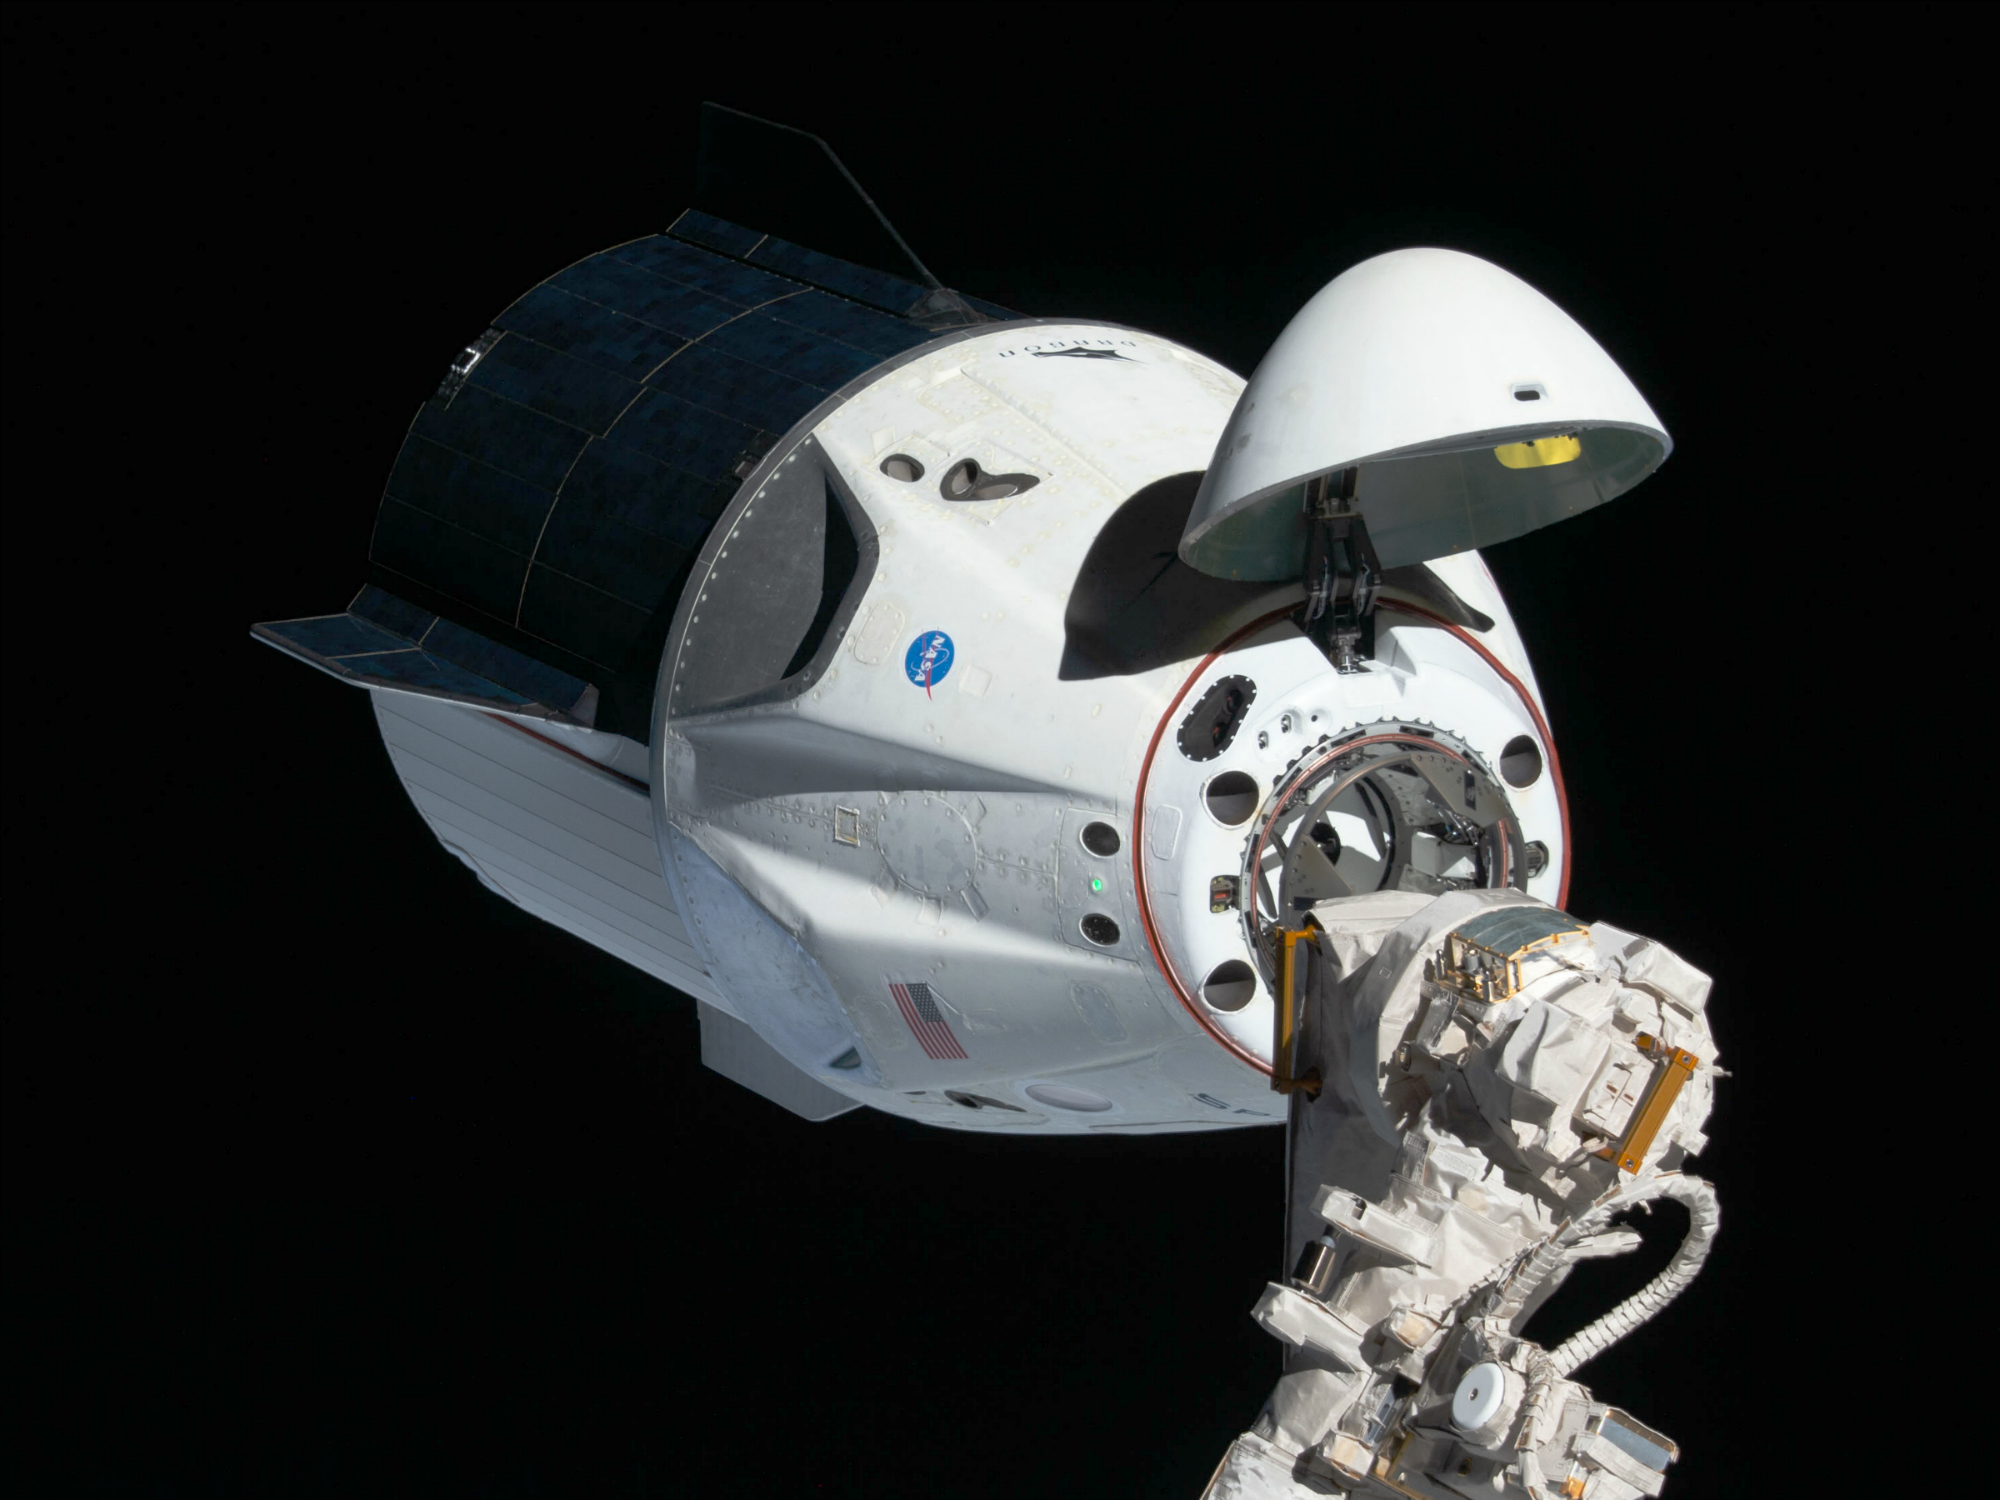 The SpaceX Crew Dragon spacecraft approaches the ISS for docking